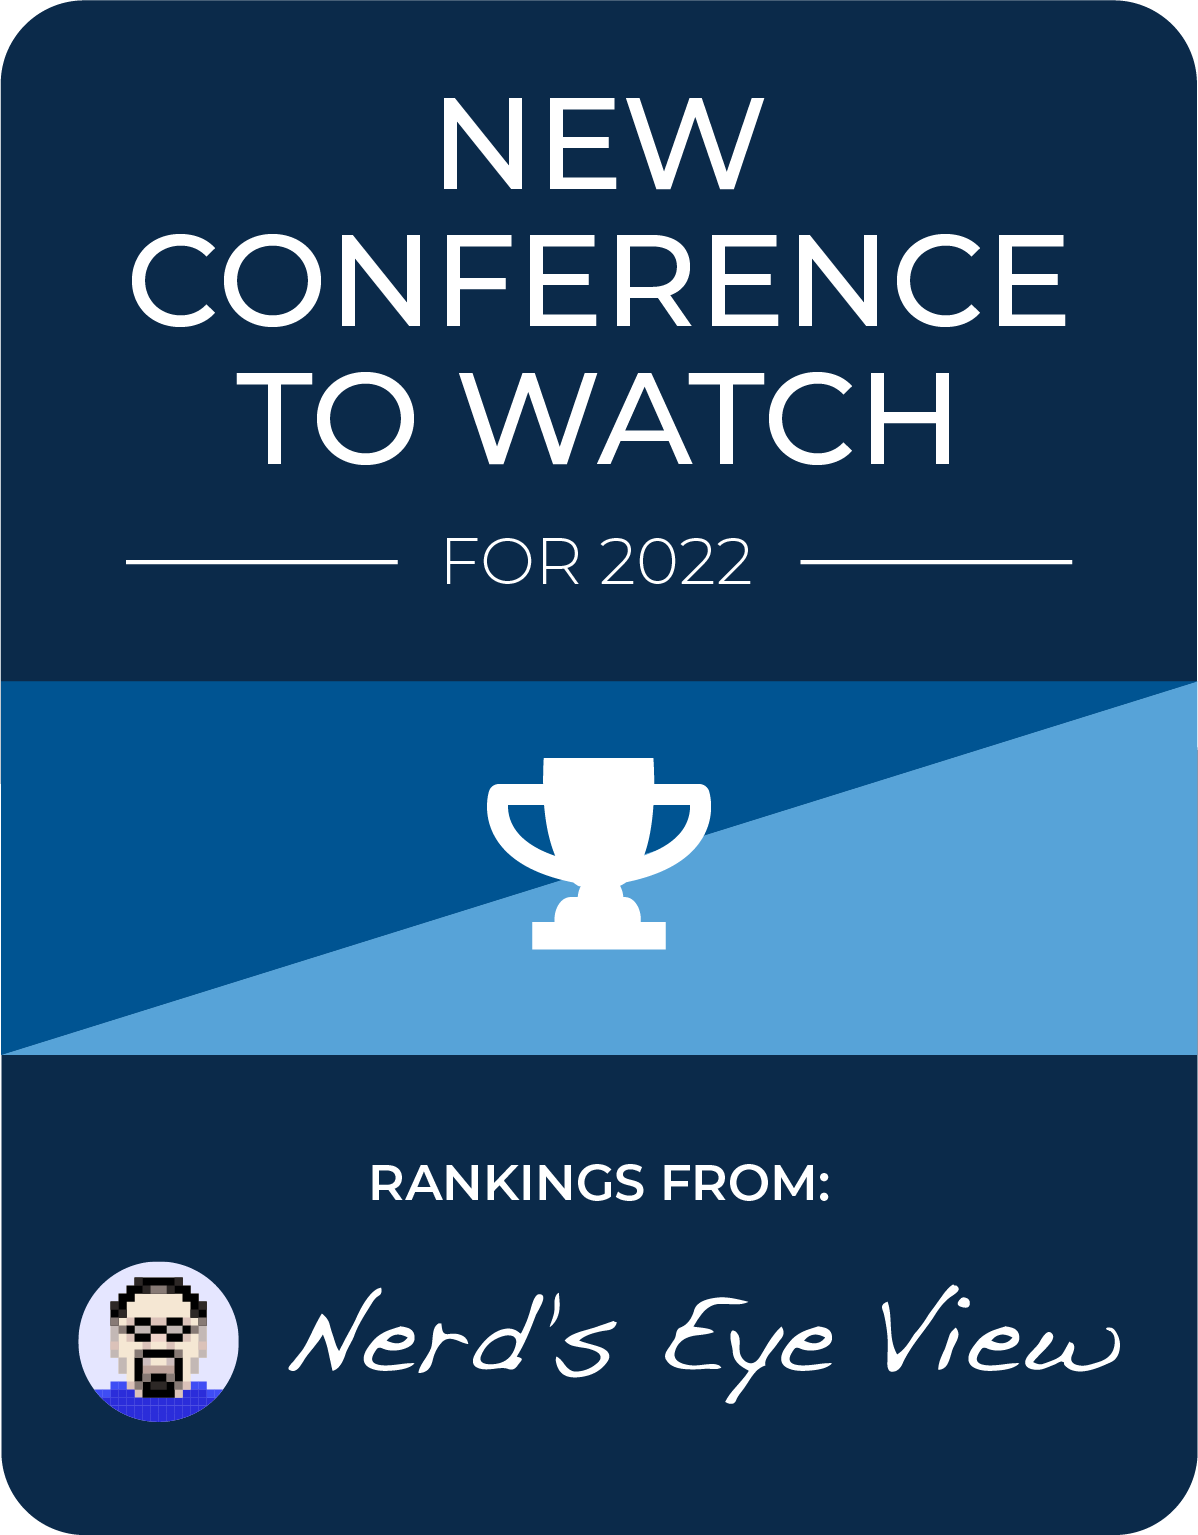 New Conferences To Watch For Financial Advisors in 2022 - Rankings From Nerd's Eye View